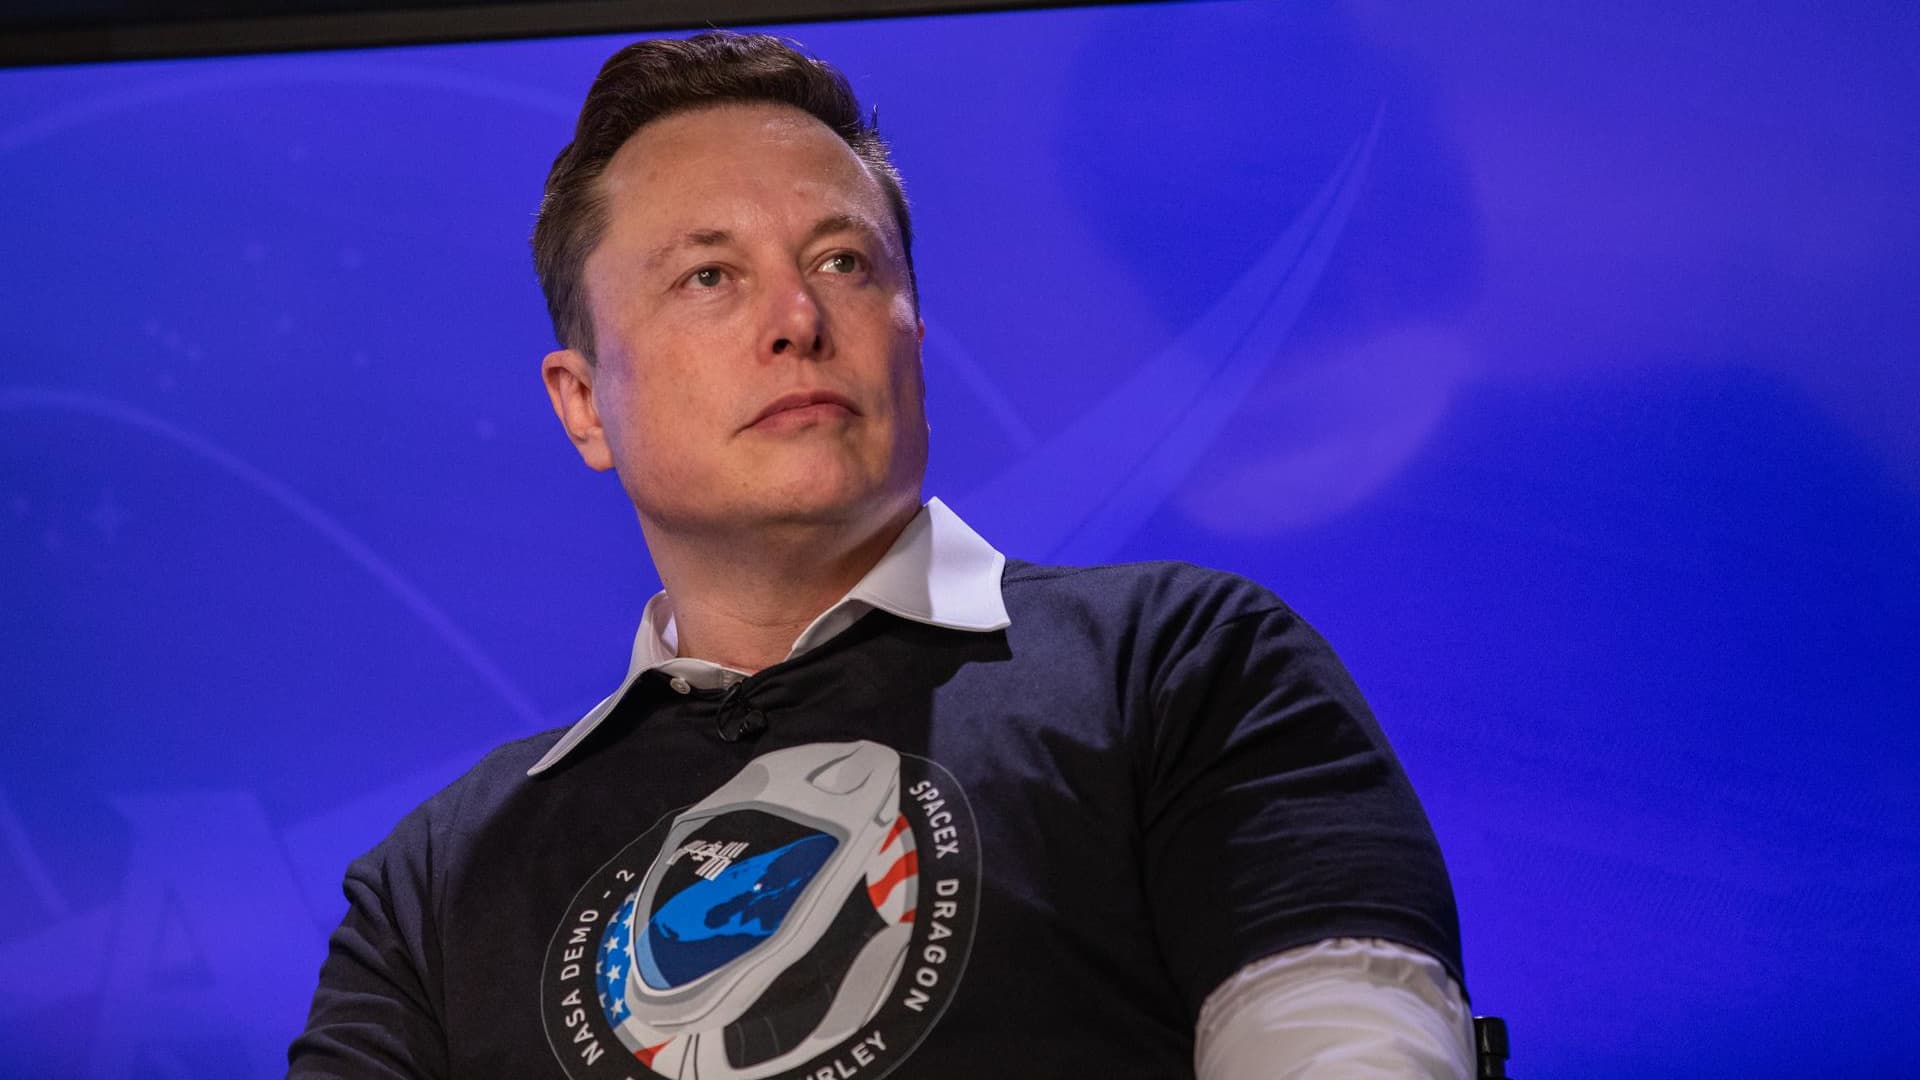 SpaceX president defends Elon Musk over sexual misconduct claims: ‘I believe the allegations to be false’